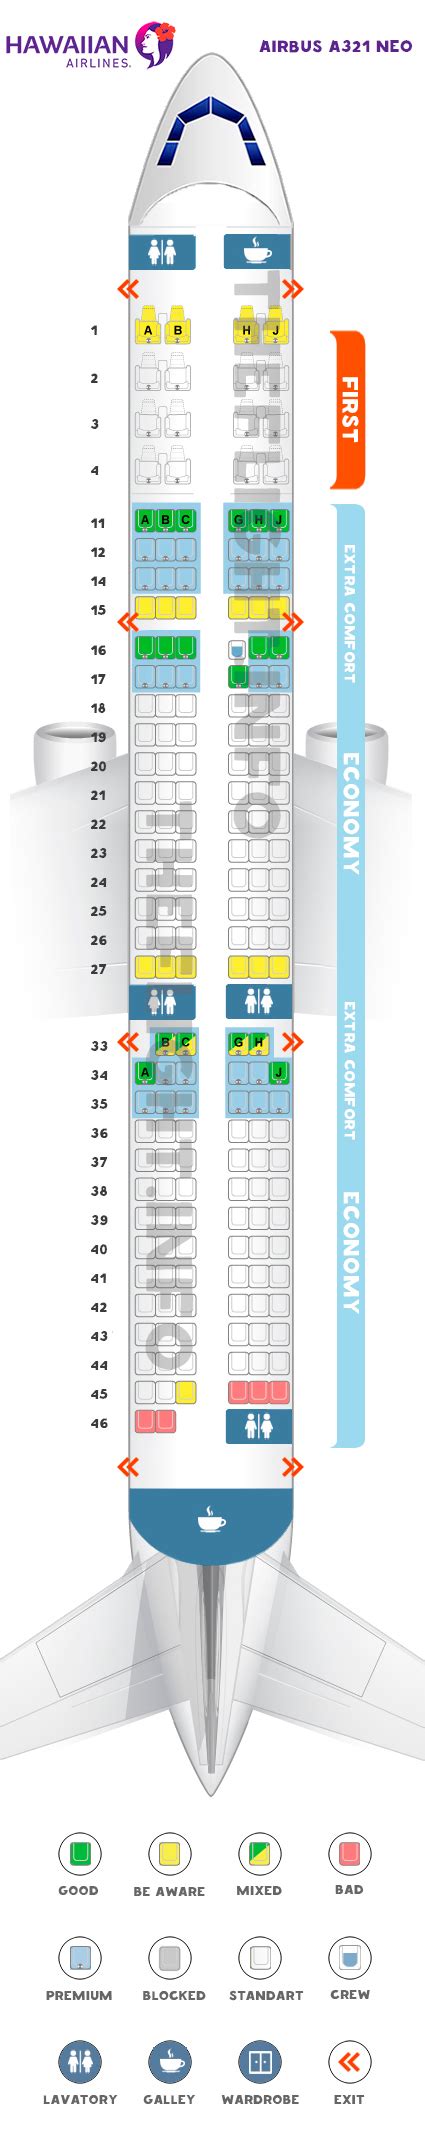 Seat Map Airbus A Neo Hawaiian Airlines Best Seats In The Plane Hot